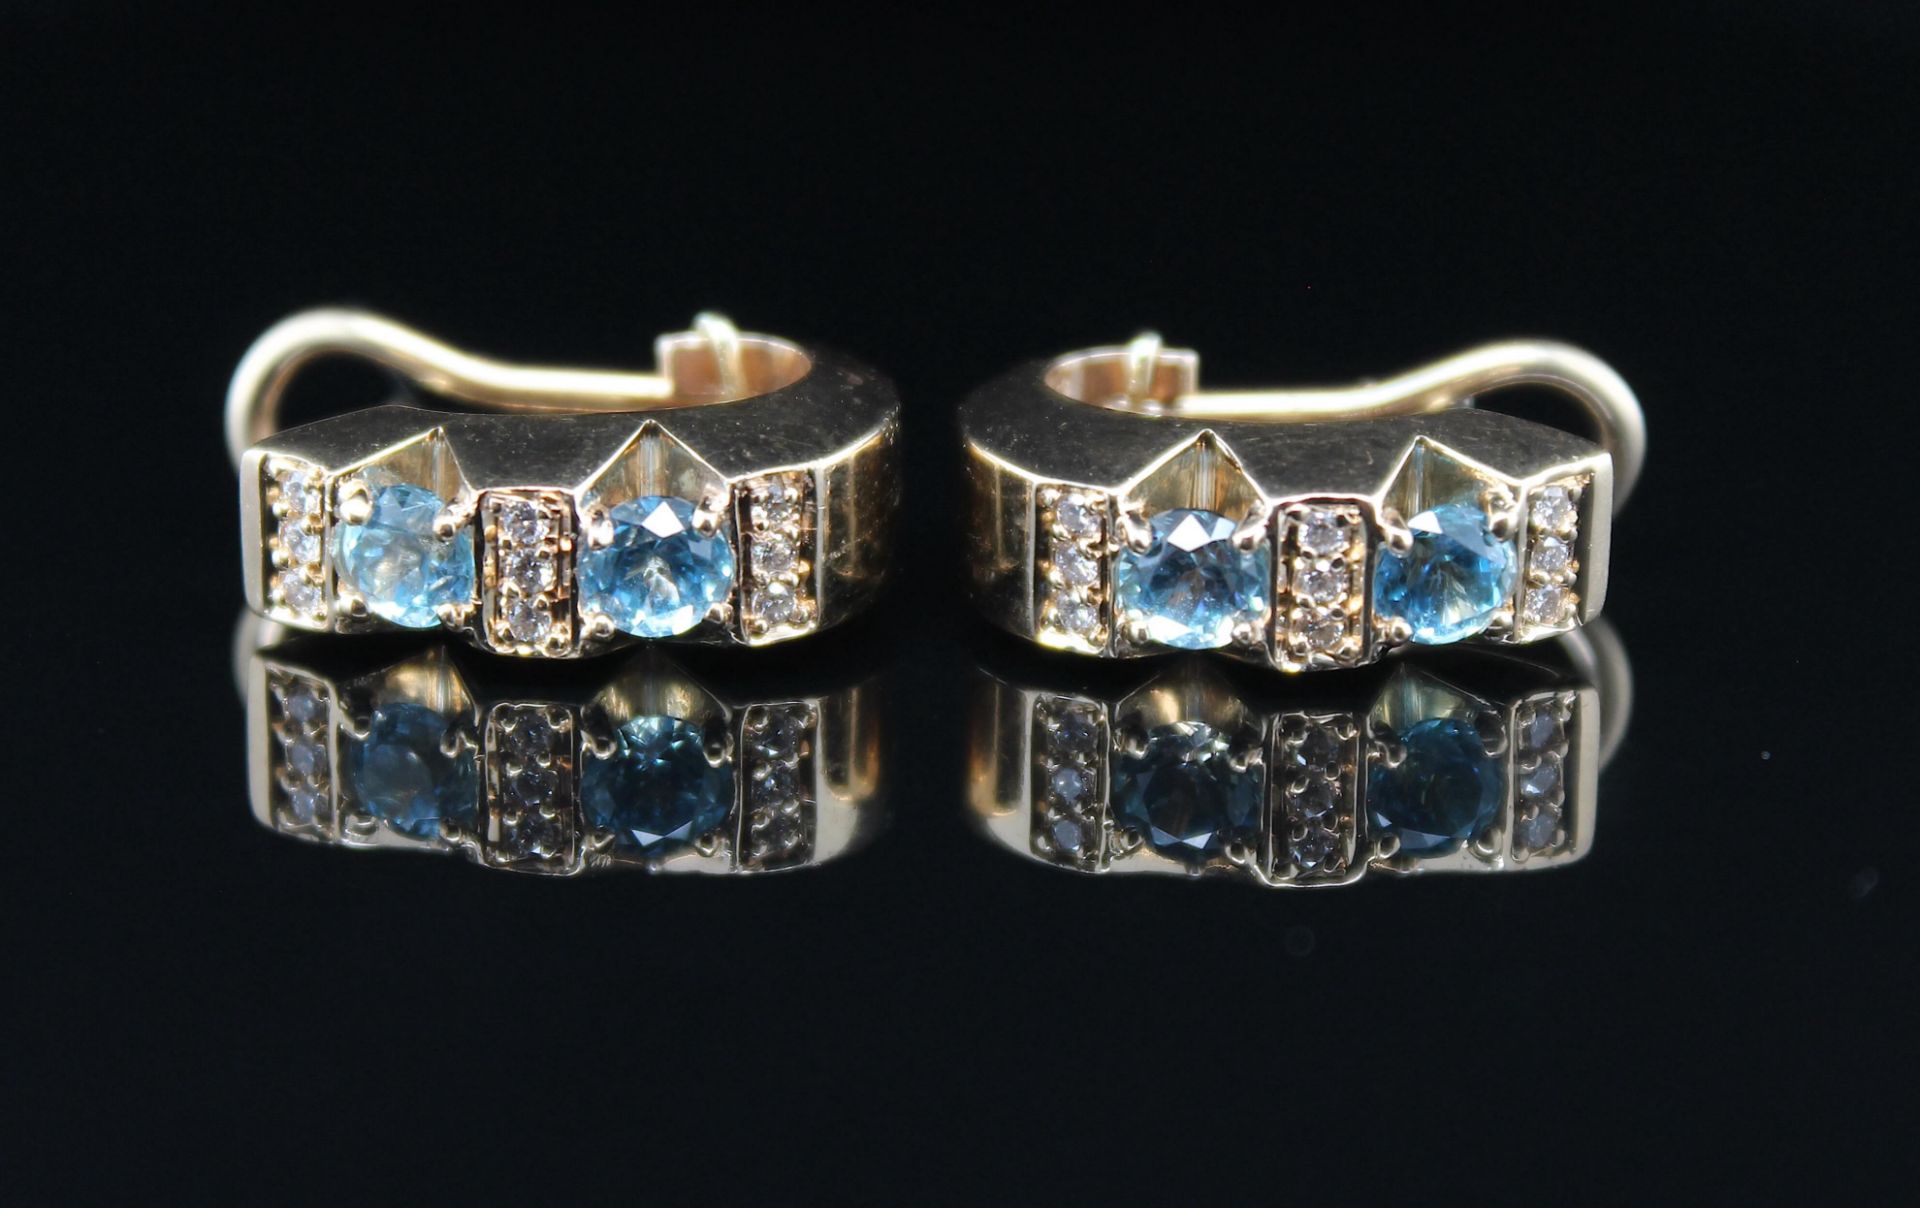 Christ earrings with topaz and brilliants